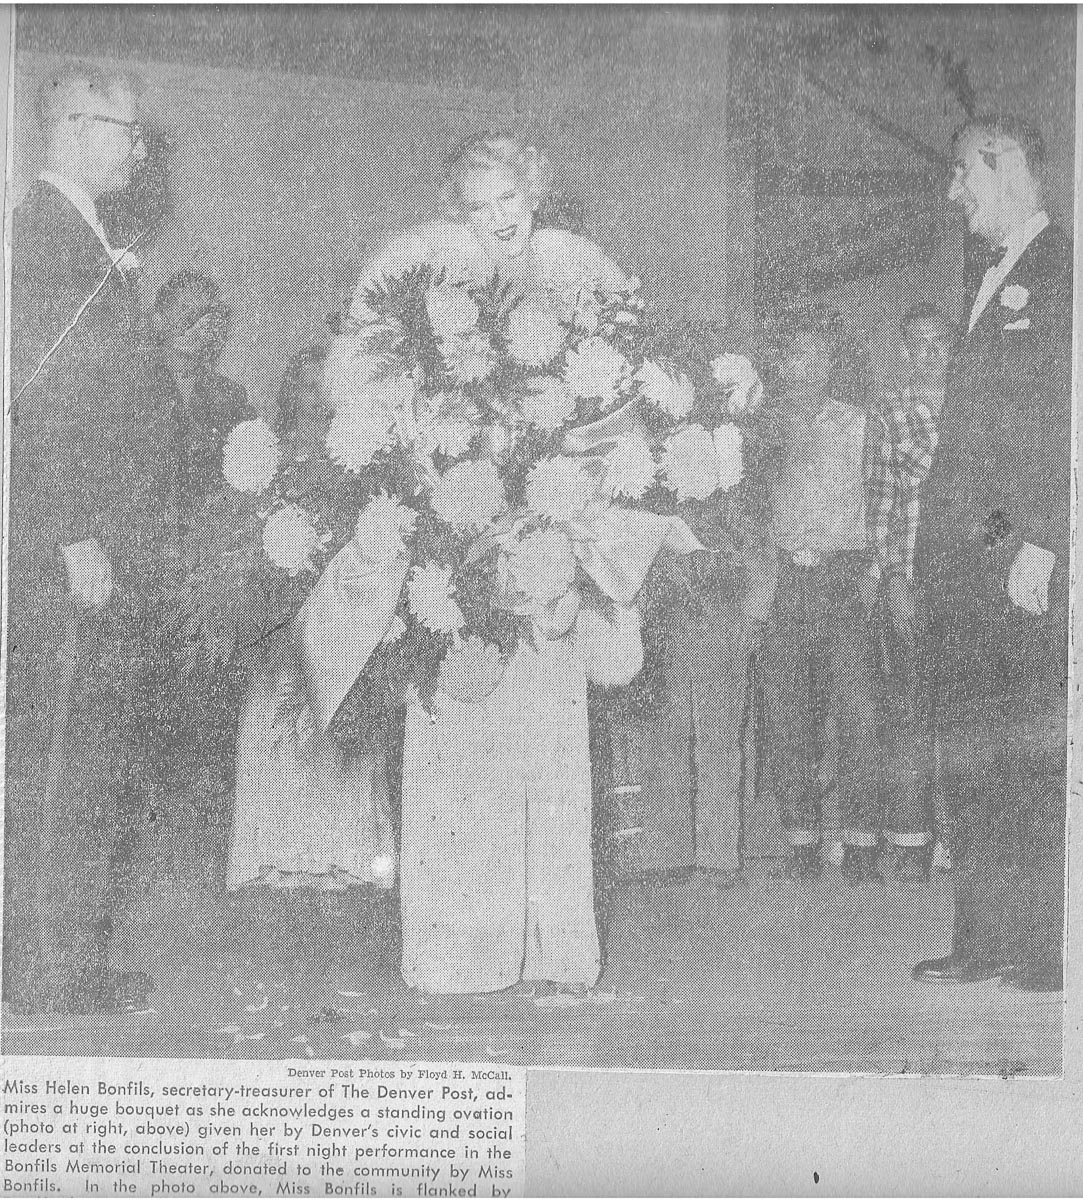 Newspaper Articles from the Grand Gala Opening of the Bonfils Theatre